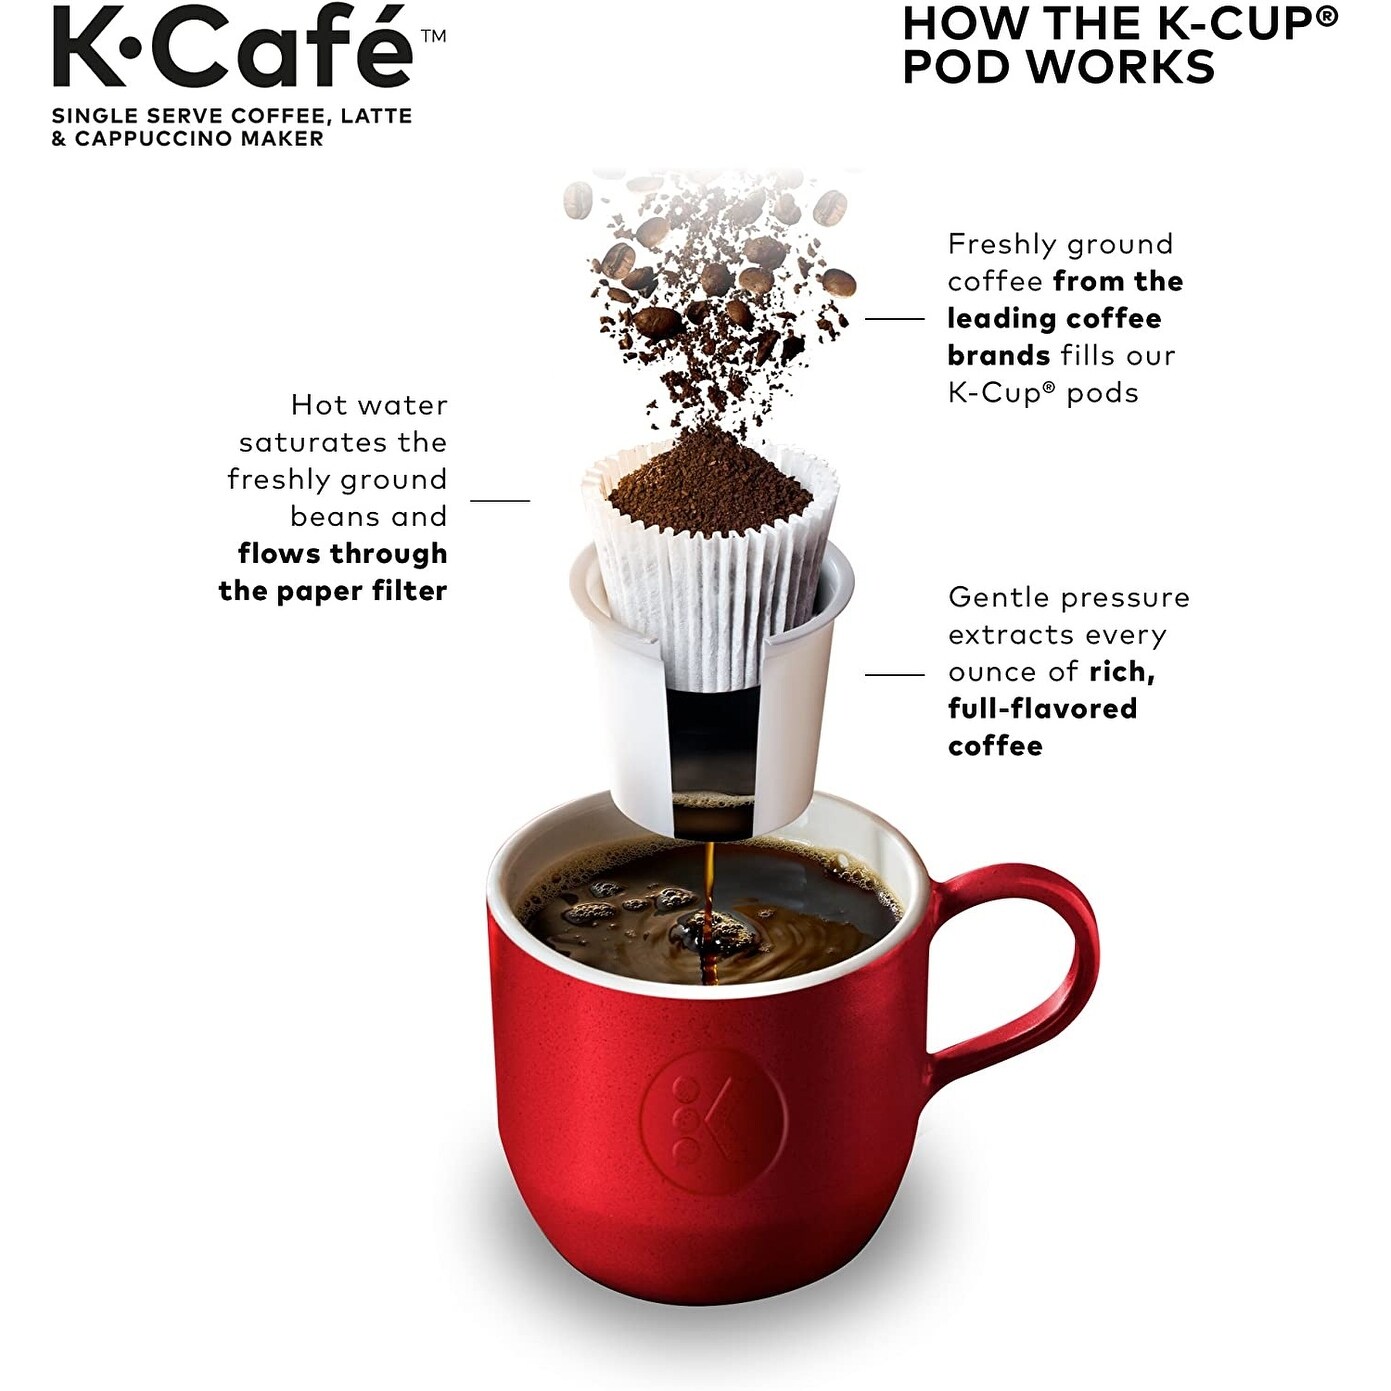 https://ak1.ostkcdn.com/images/products/is/images/direct/15df18fcaa456016e07fceb36ab4e74dd0025478/Keurig-K-Cafe-Single-Serve-K-Cup-Coffee-Maker%2C-Latte-Maker-and-Cappuccino-Maker%2C-With-Frother%2C-Dark-Charcoal.jpg